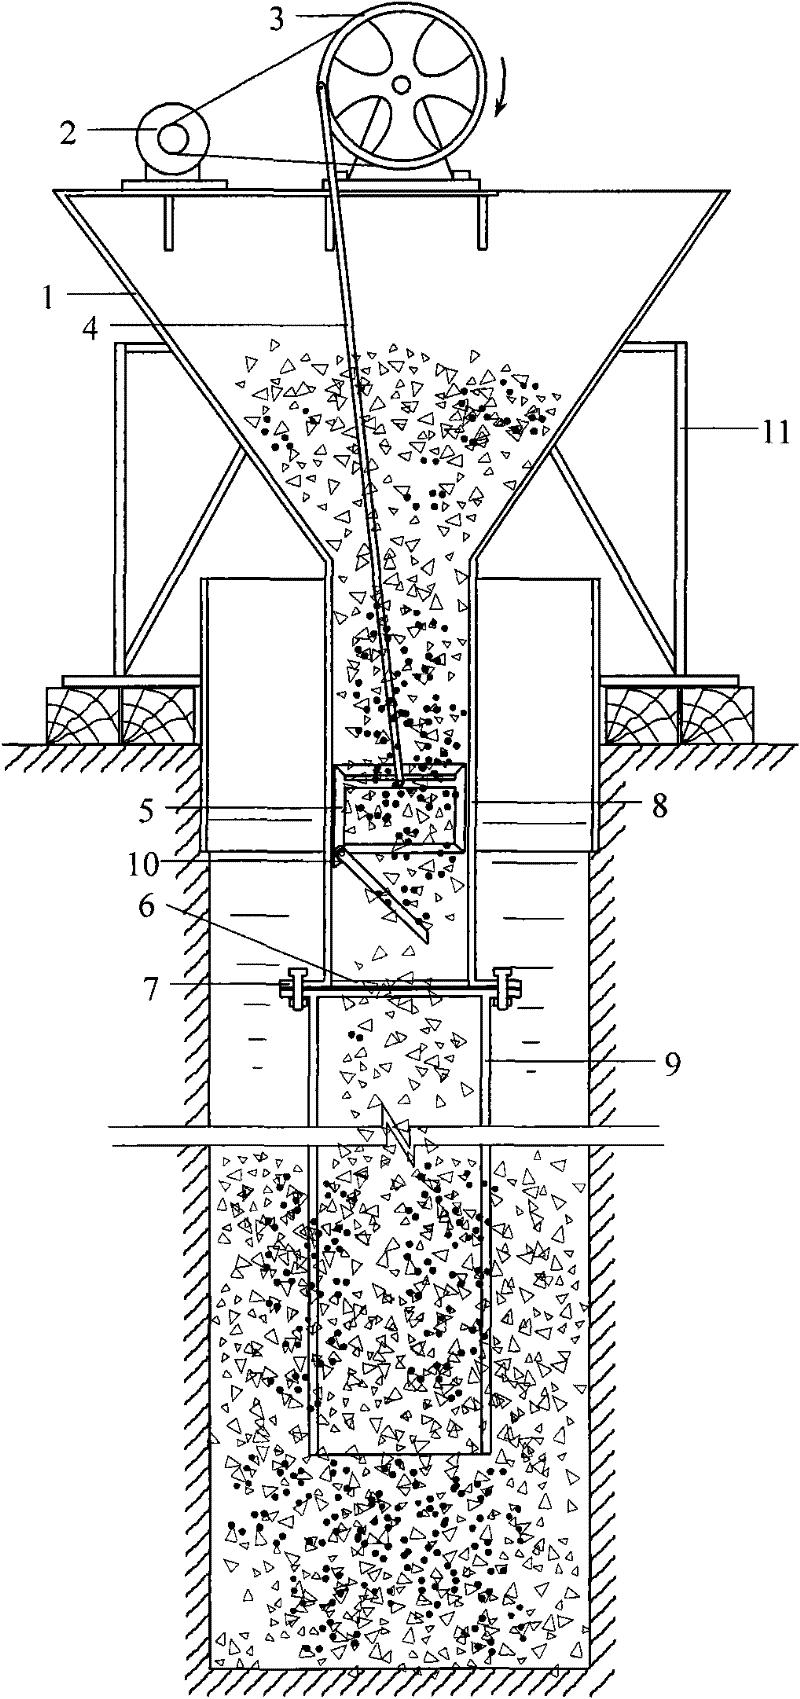 Compulsory pouring device and construction method of bored pile underwater concrete